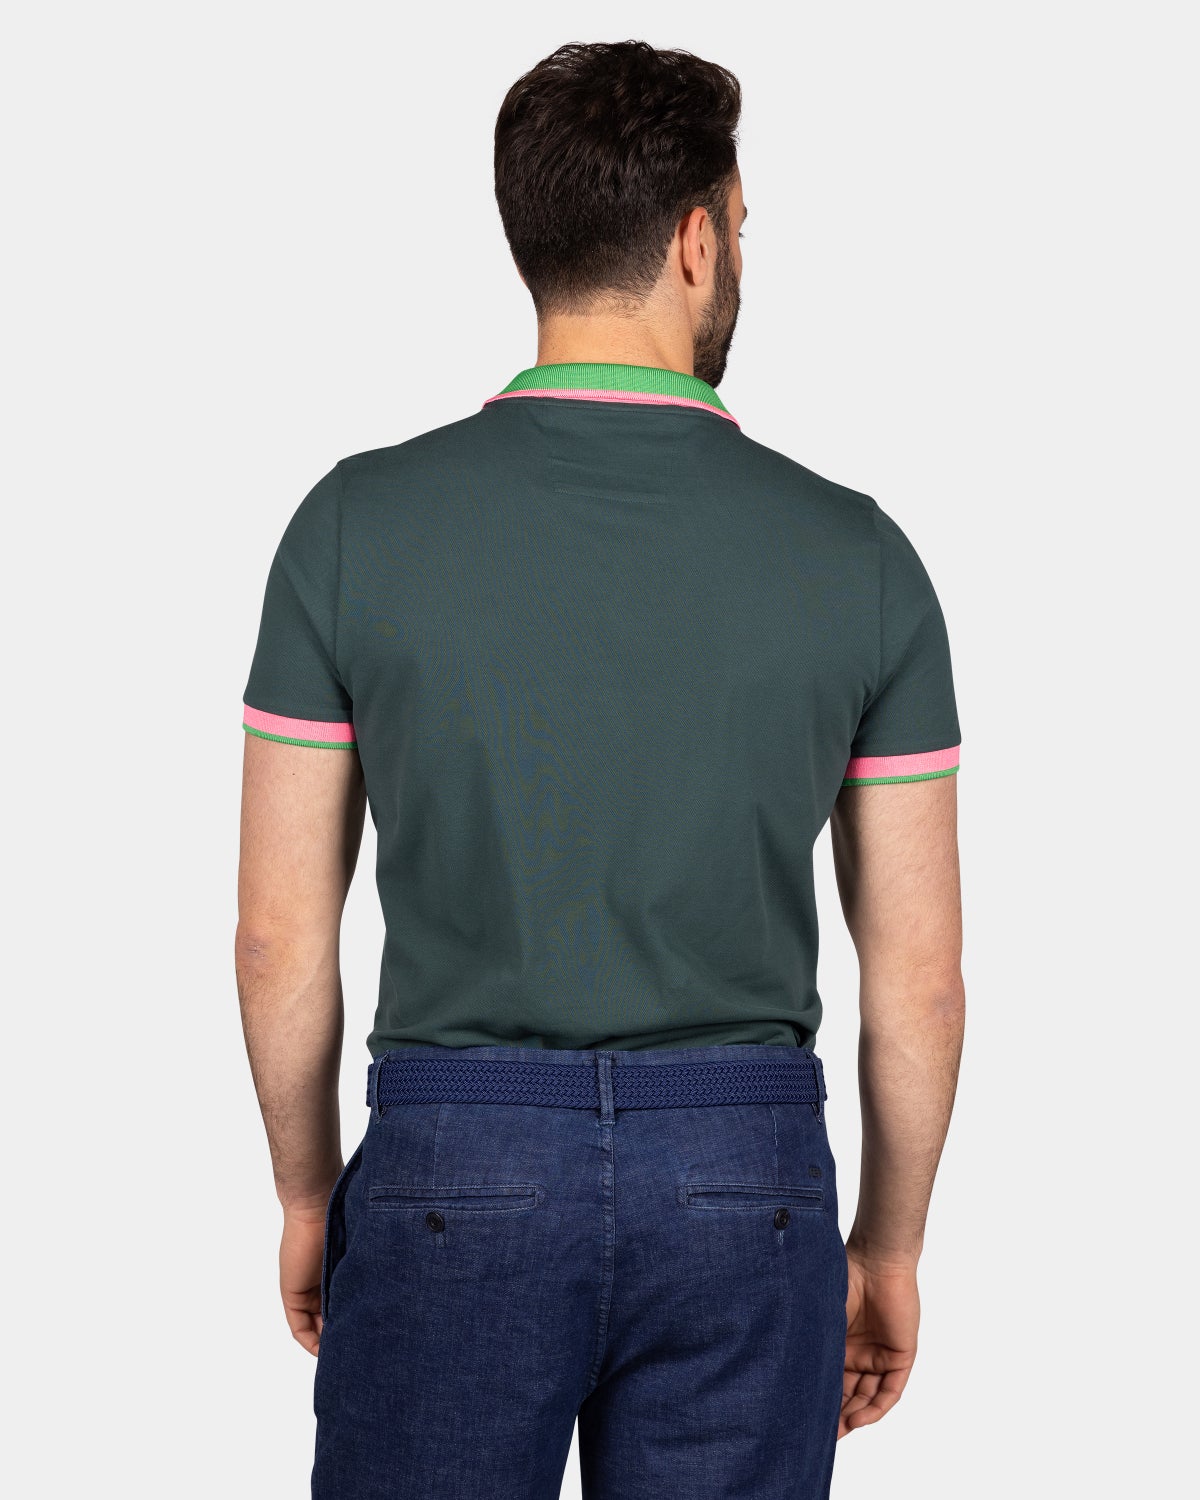 Plain poloshirt with accent colored collar - Classic Green